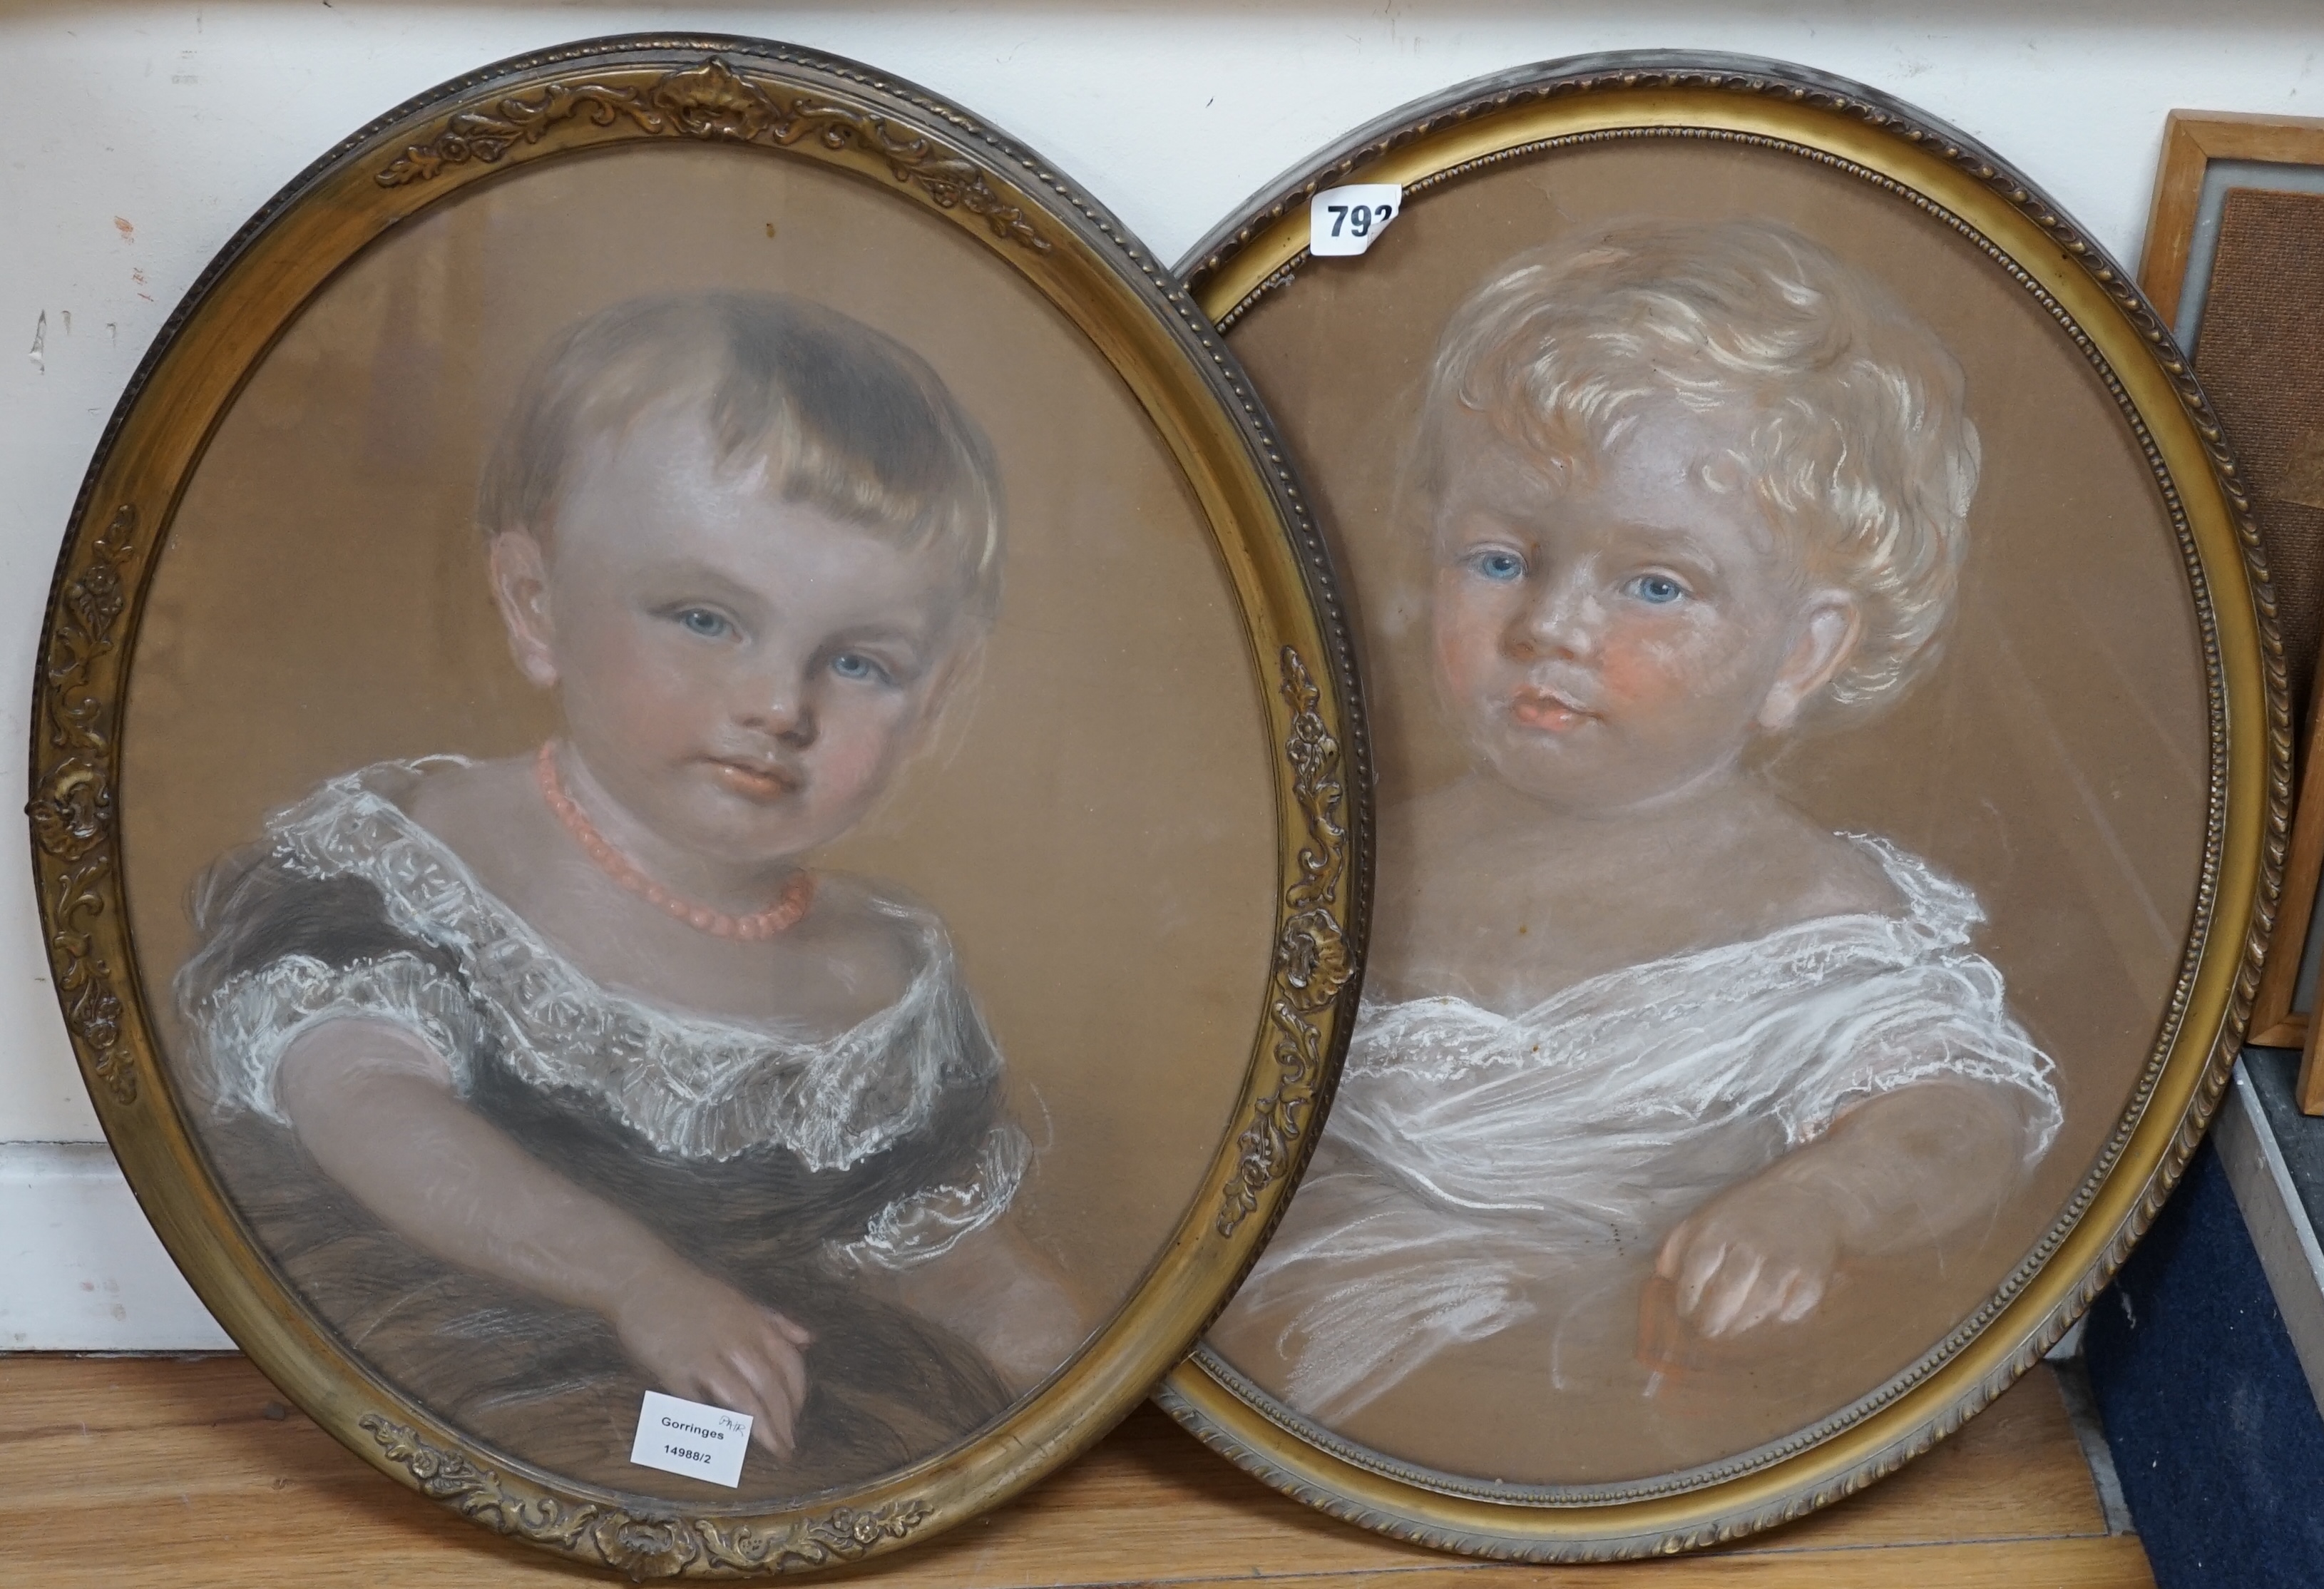 19th century English School, pair of oval heightened pastels, Portraits of infants, one indistinctly signed in pencil, 50 x 40cm. Condition - fair